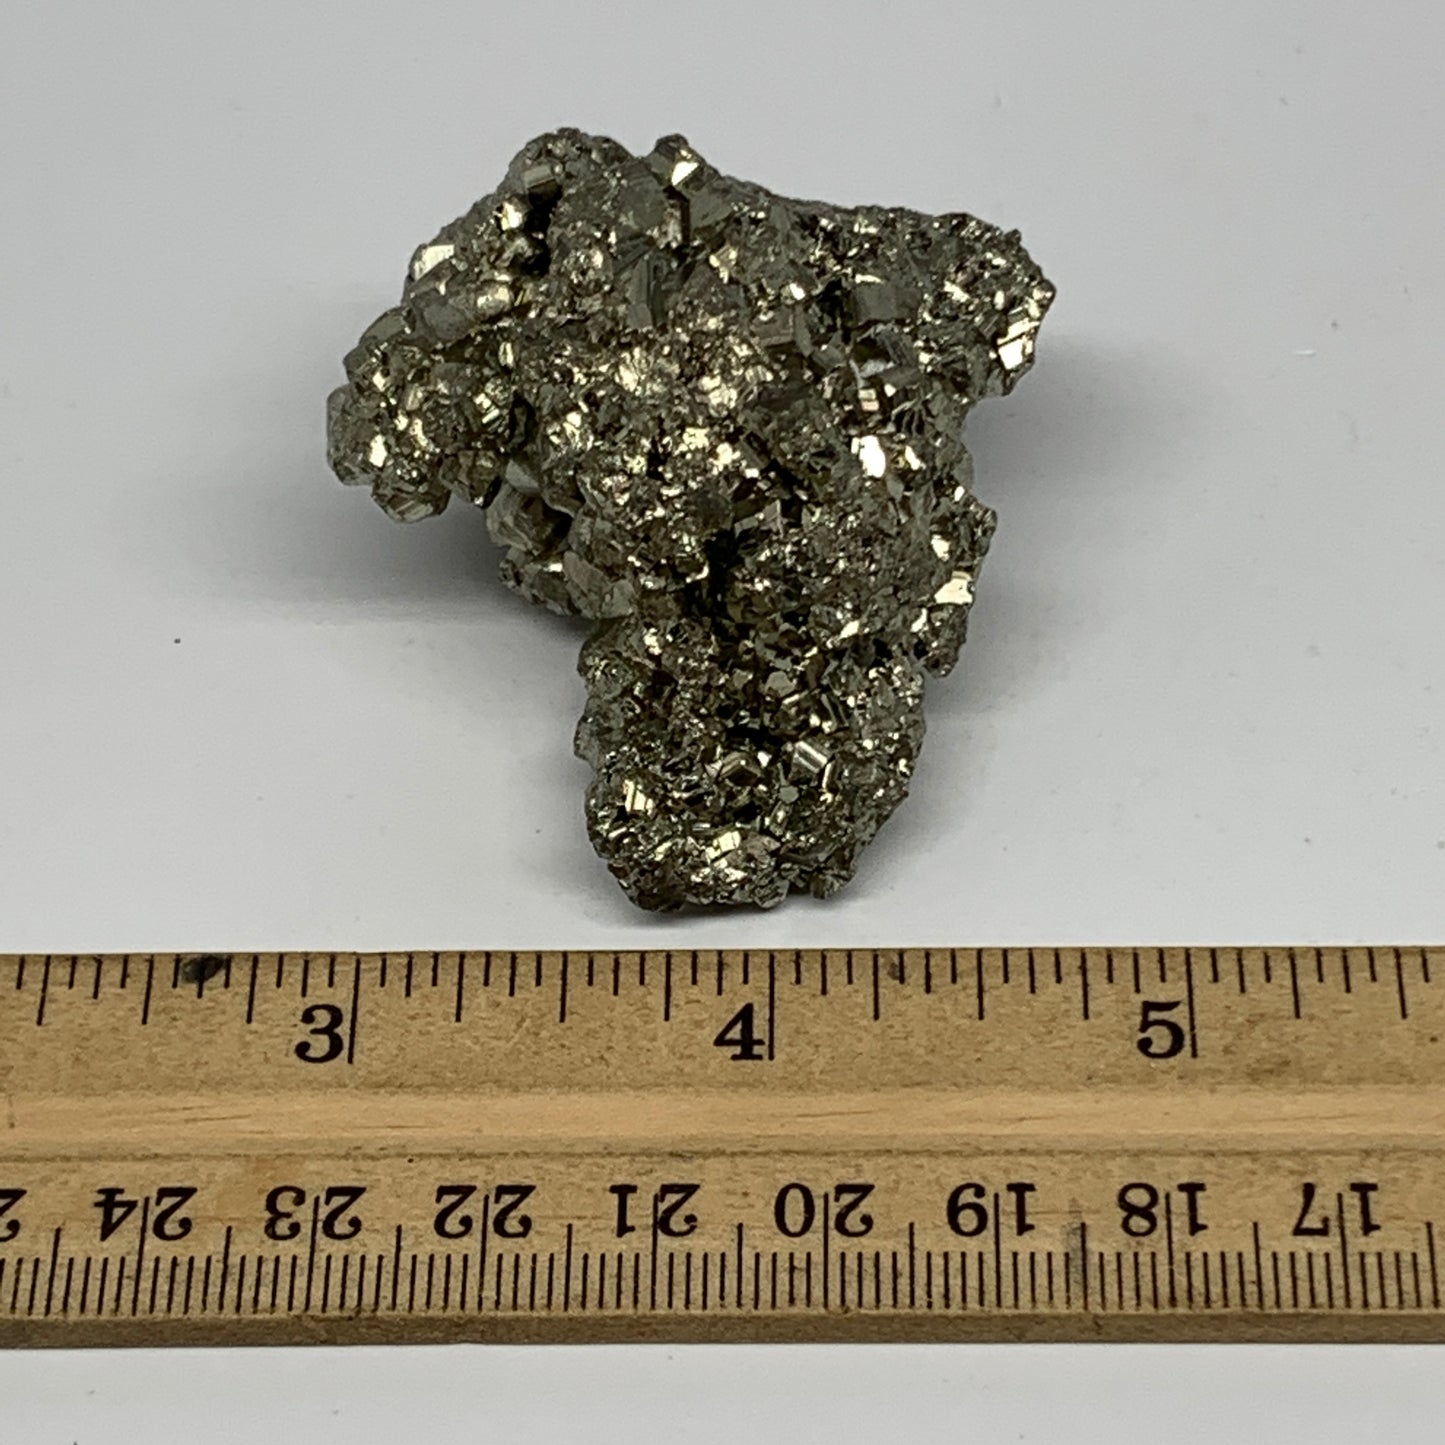 91.1g, 2.1"x1.9"x1.3", Natural Untreated Pyrite Cluster Mineral Specimens,B19383